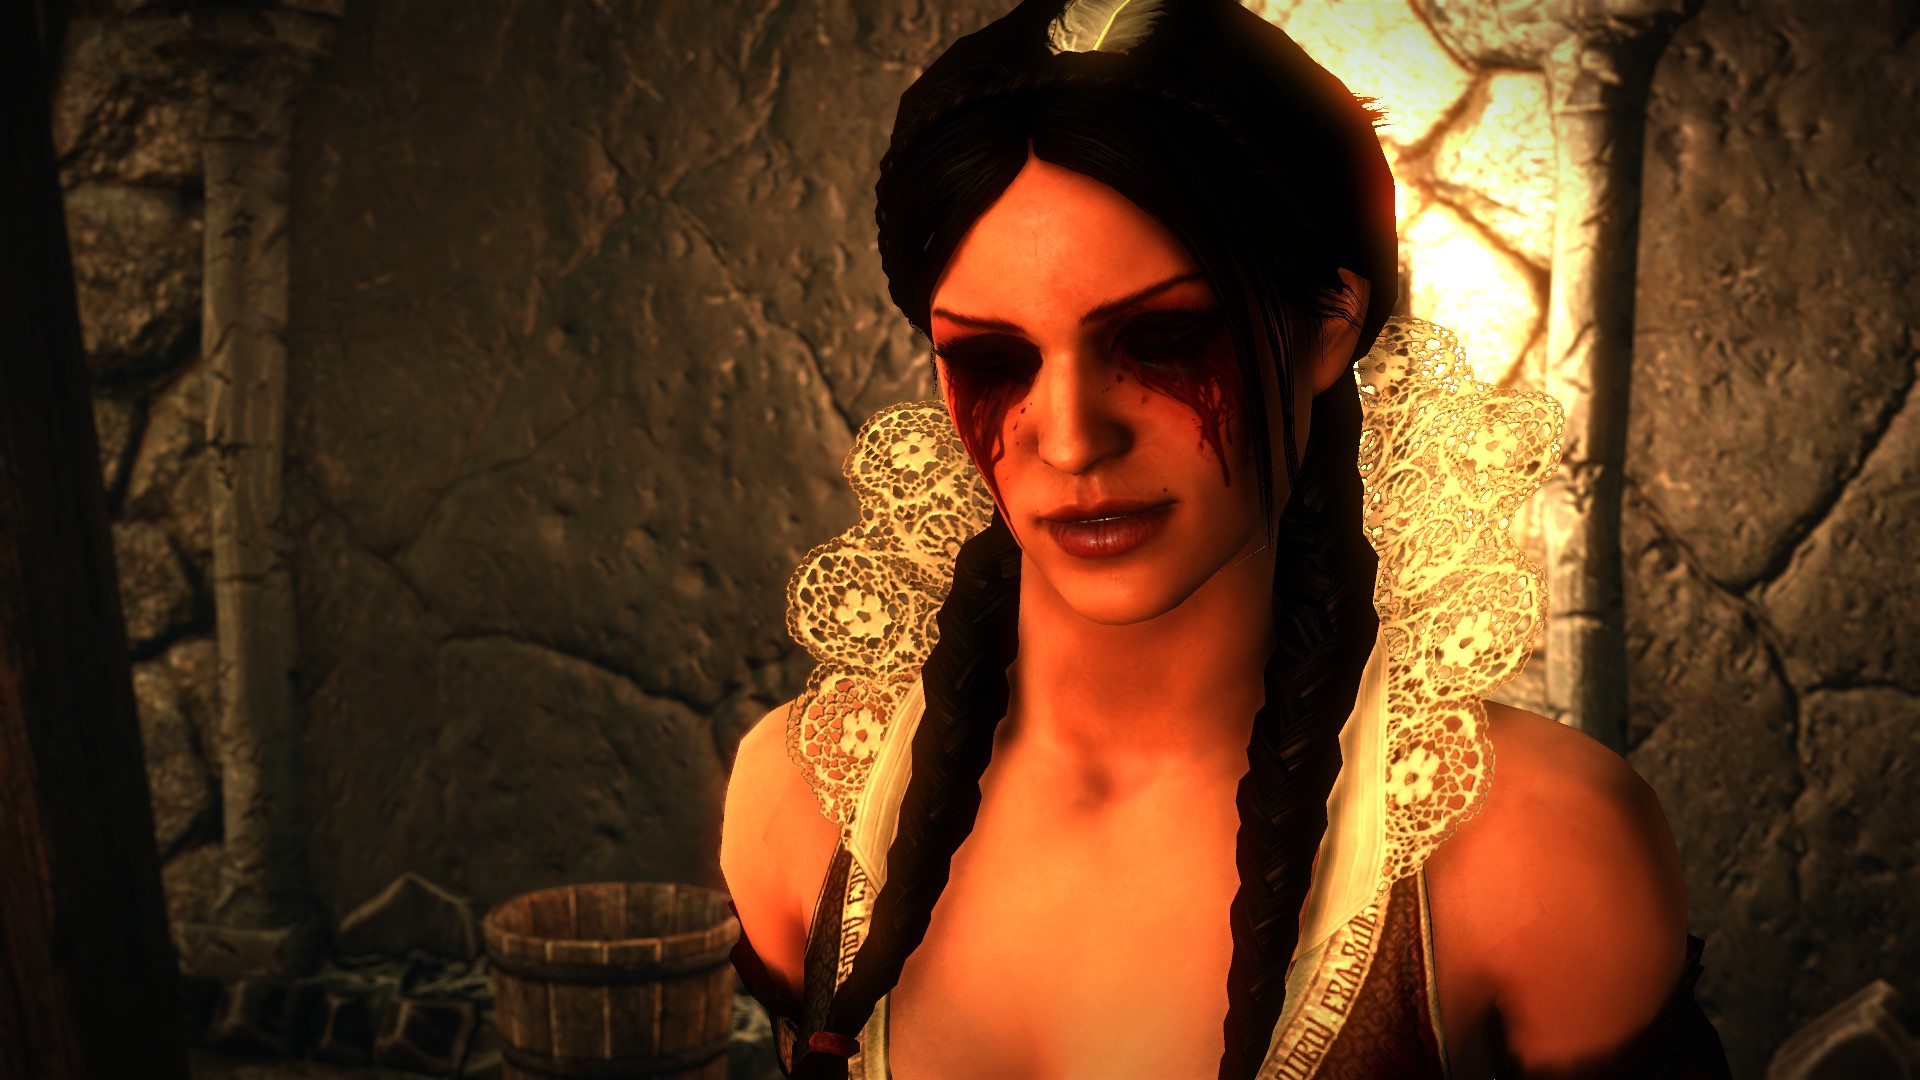 Philippa Eilhart has her eyes spooned out